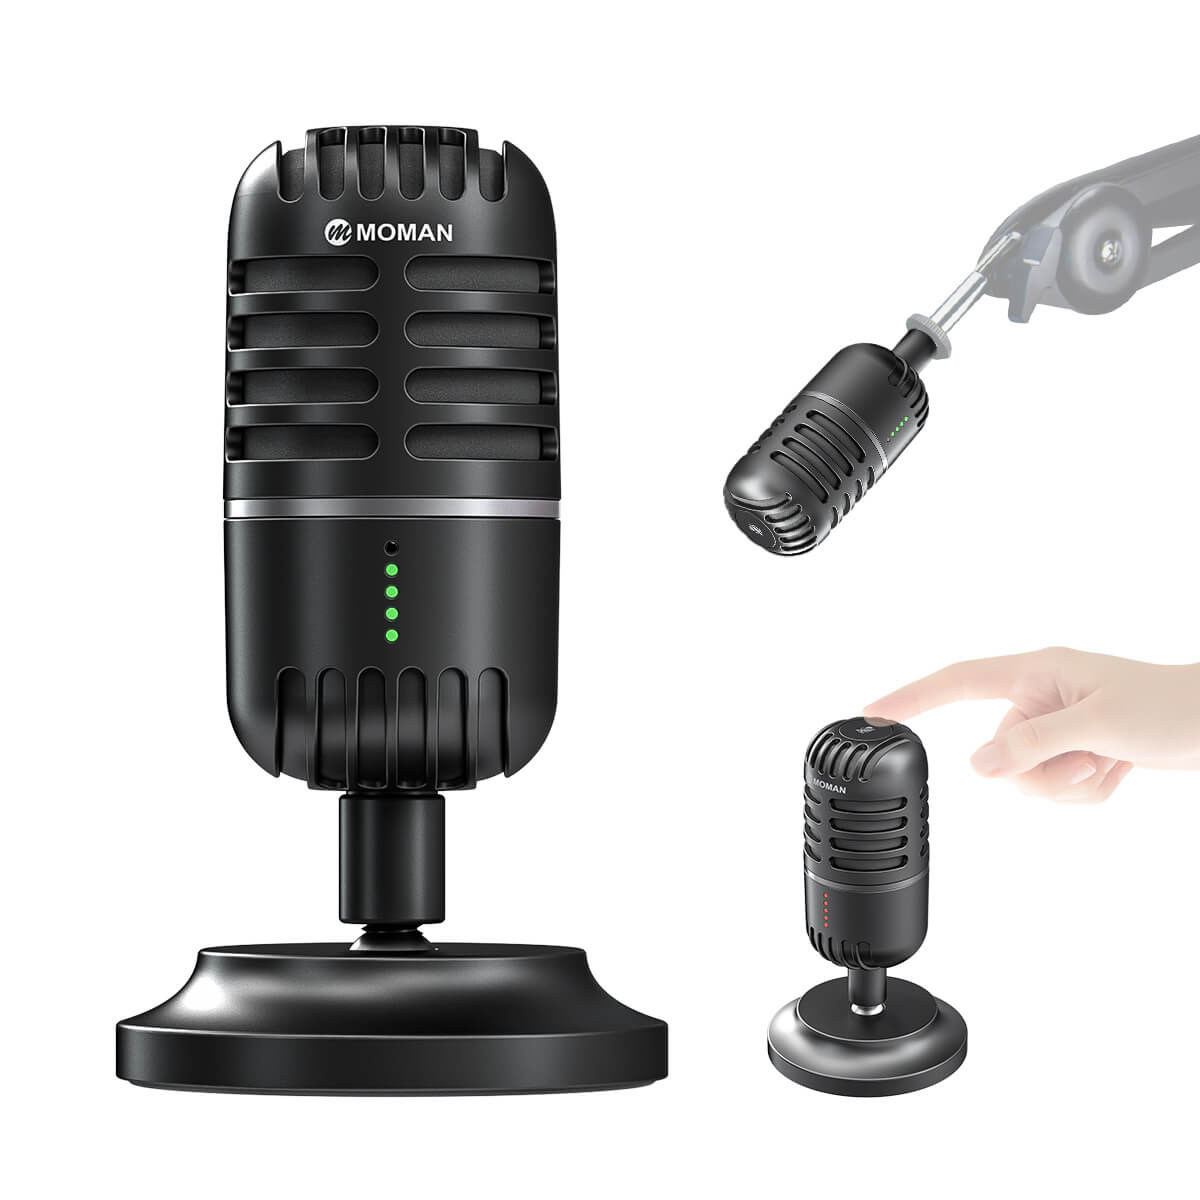 USB desktop microphone with mute button Moman EMP is able to stand on the desk or mounting on a boom arm via the 3/8